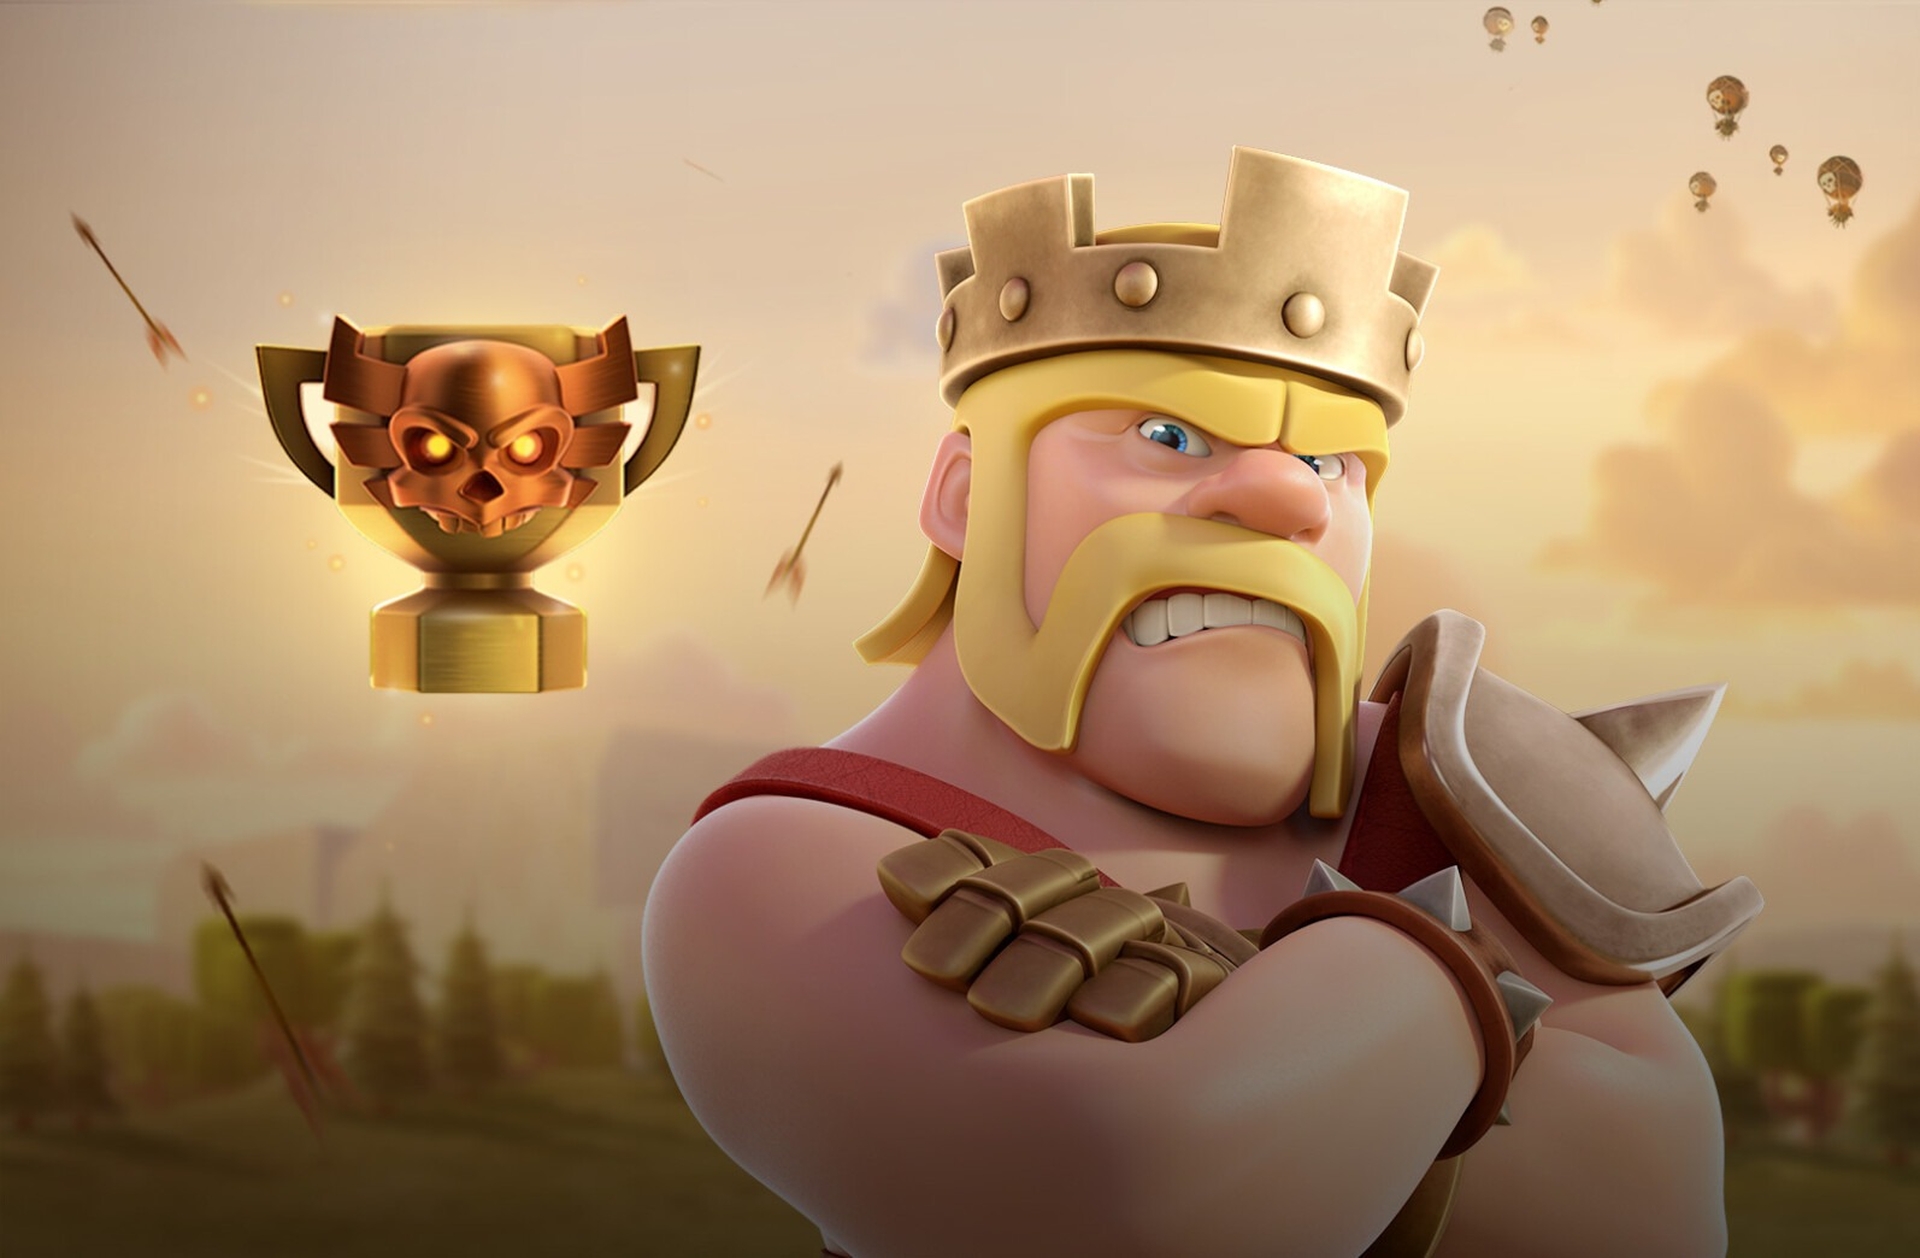 In today's guide, we will go over how to beat Royal Challenge CoC, so you can conquer this challenge as easily and quickly as possible.